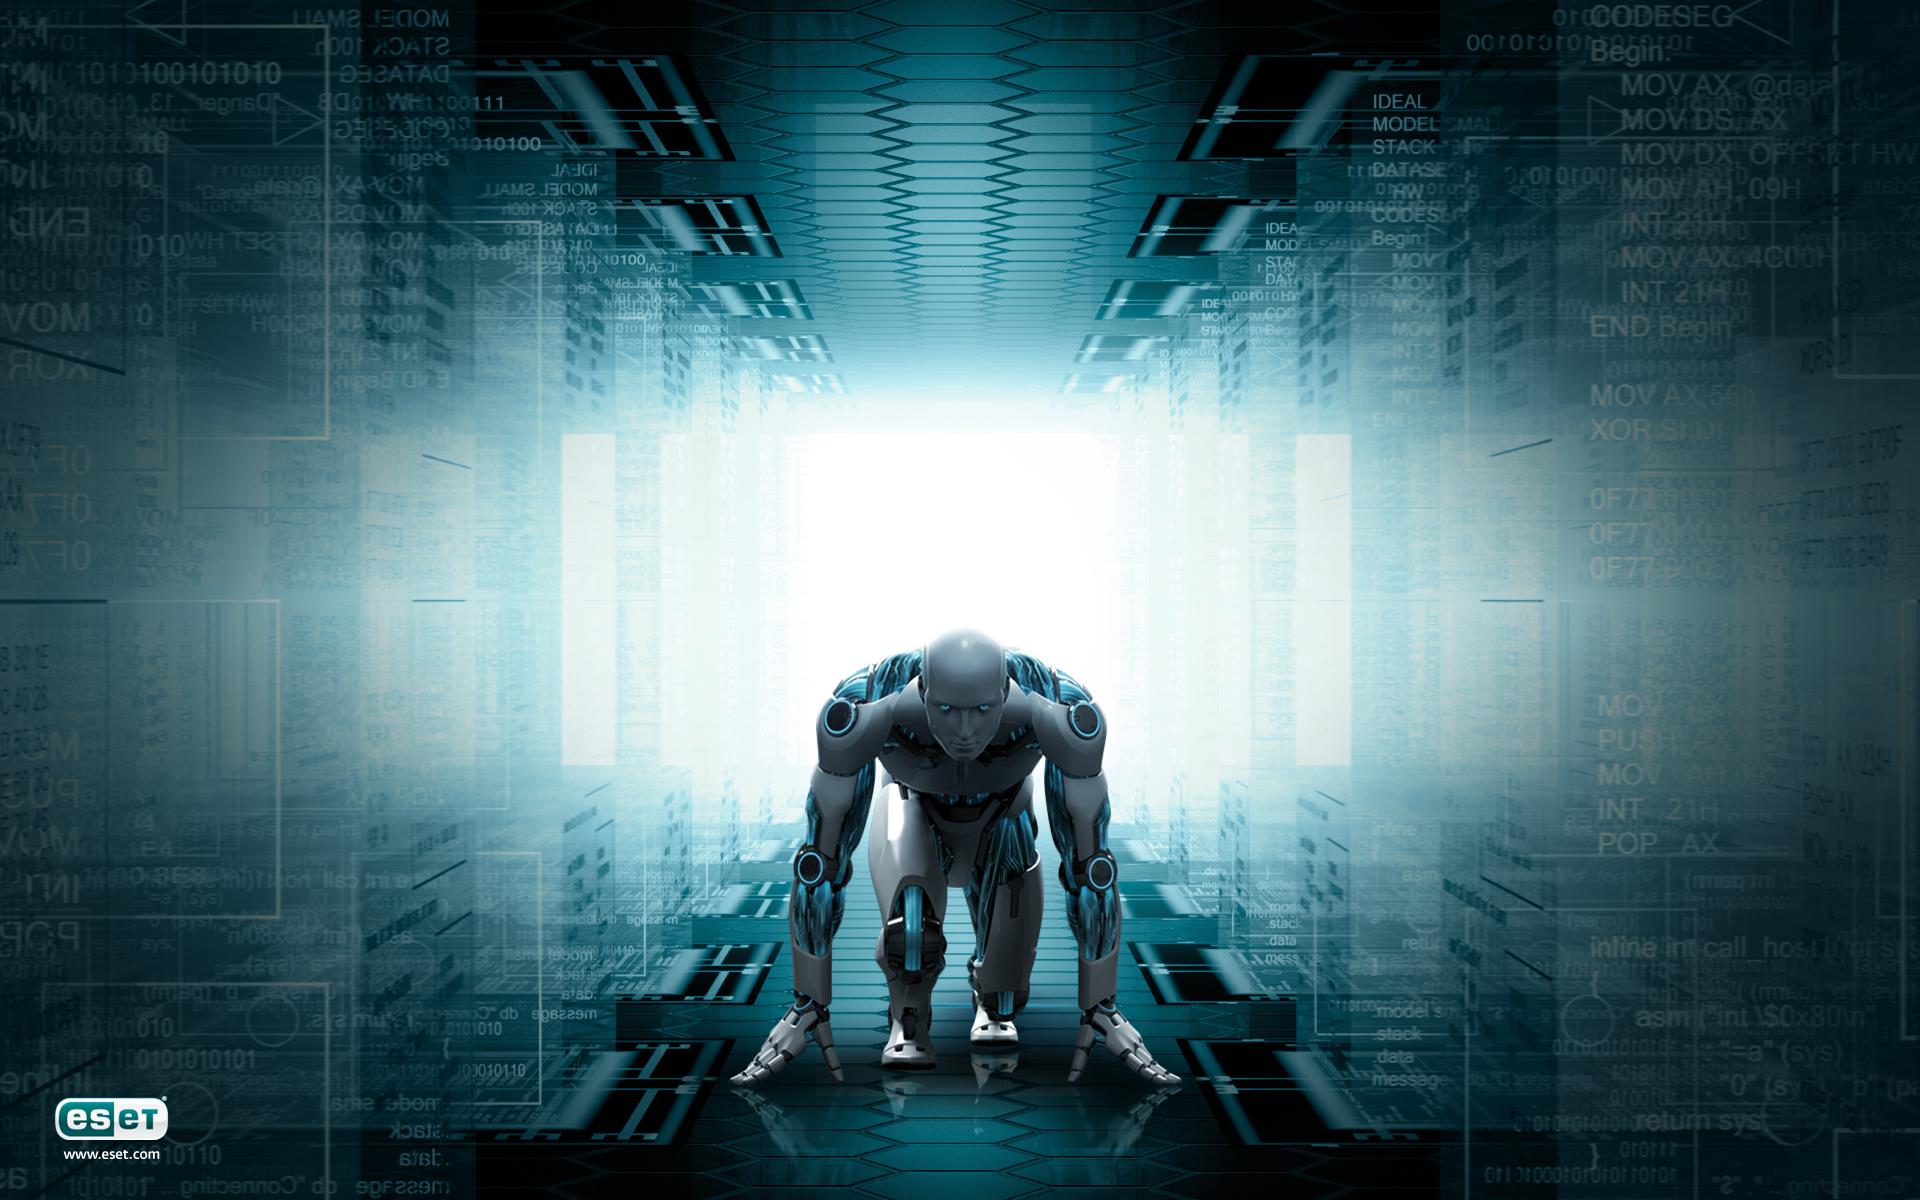 eset wallpaper,action adventure game,pc game,digital compositing,fictional character,games